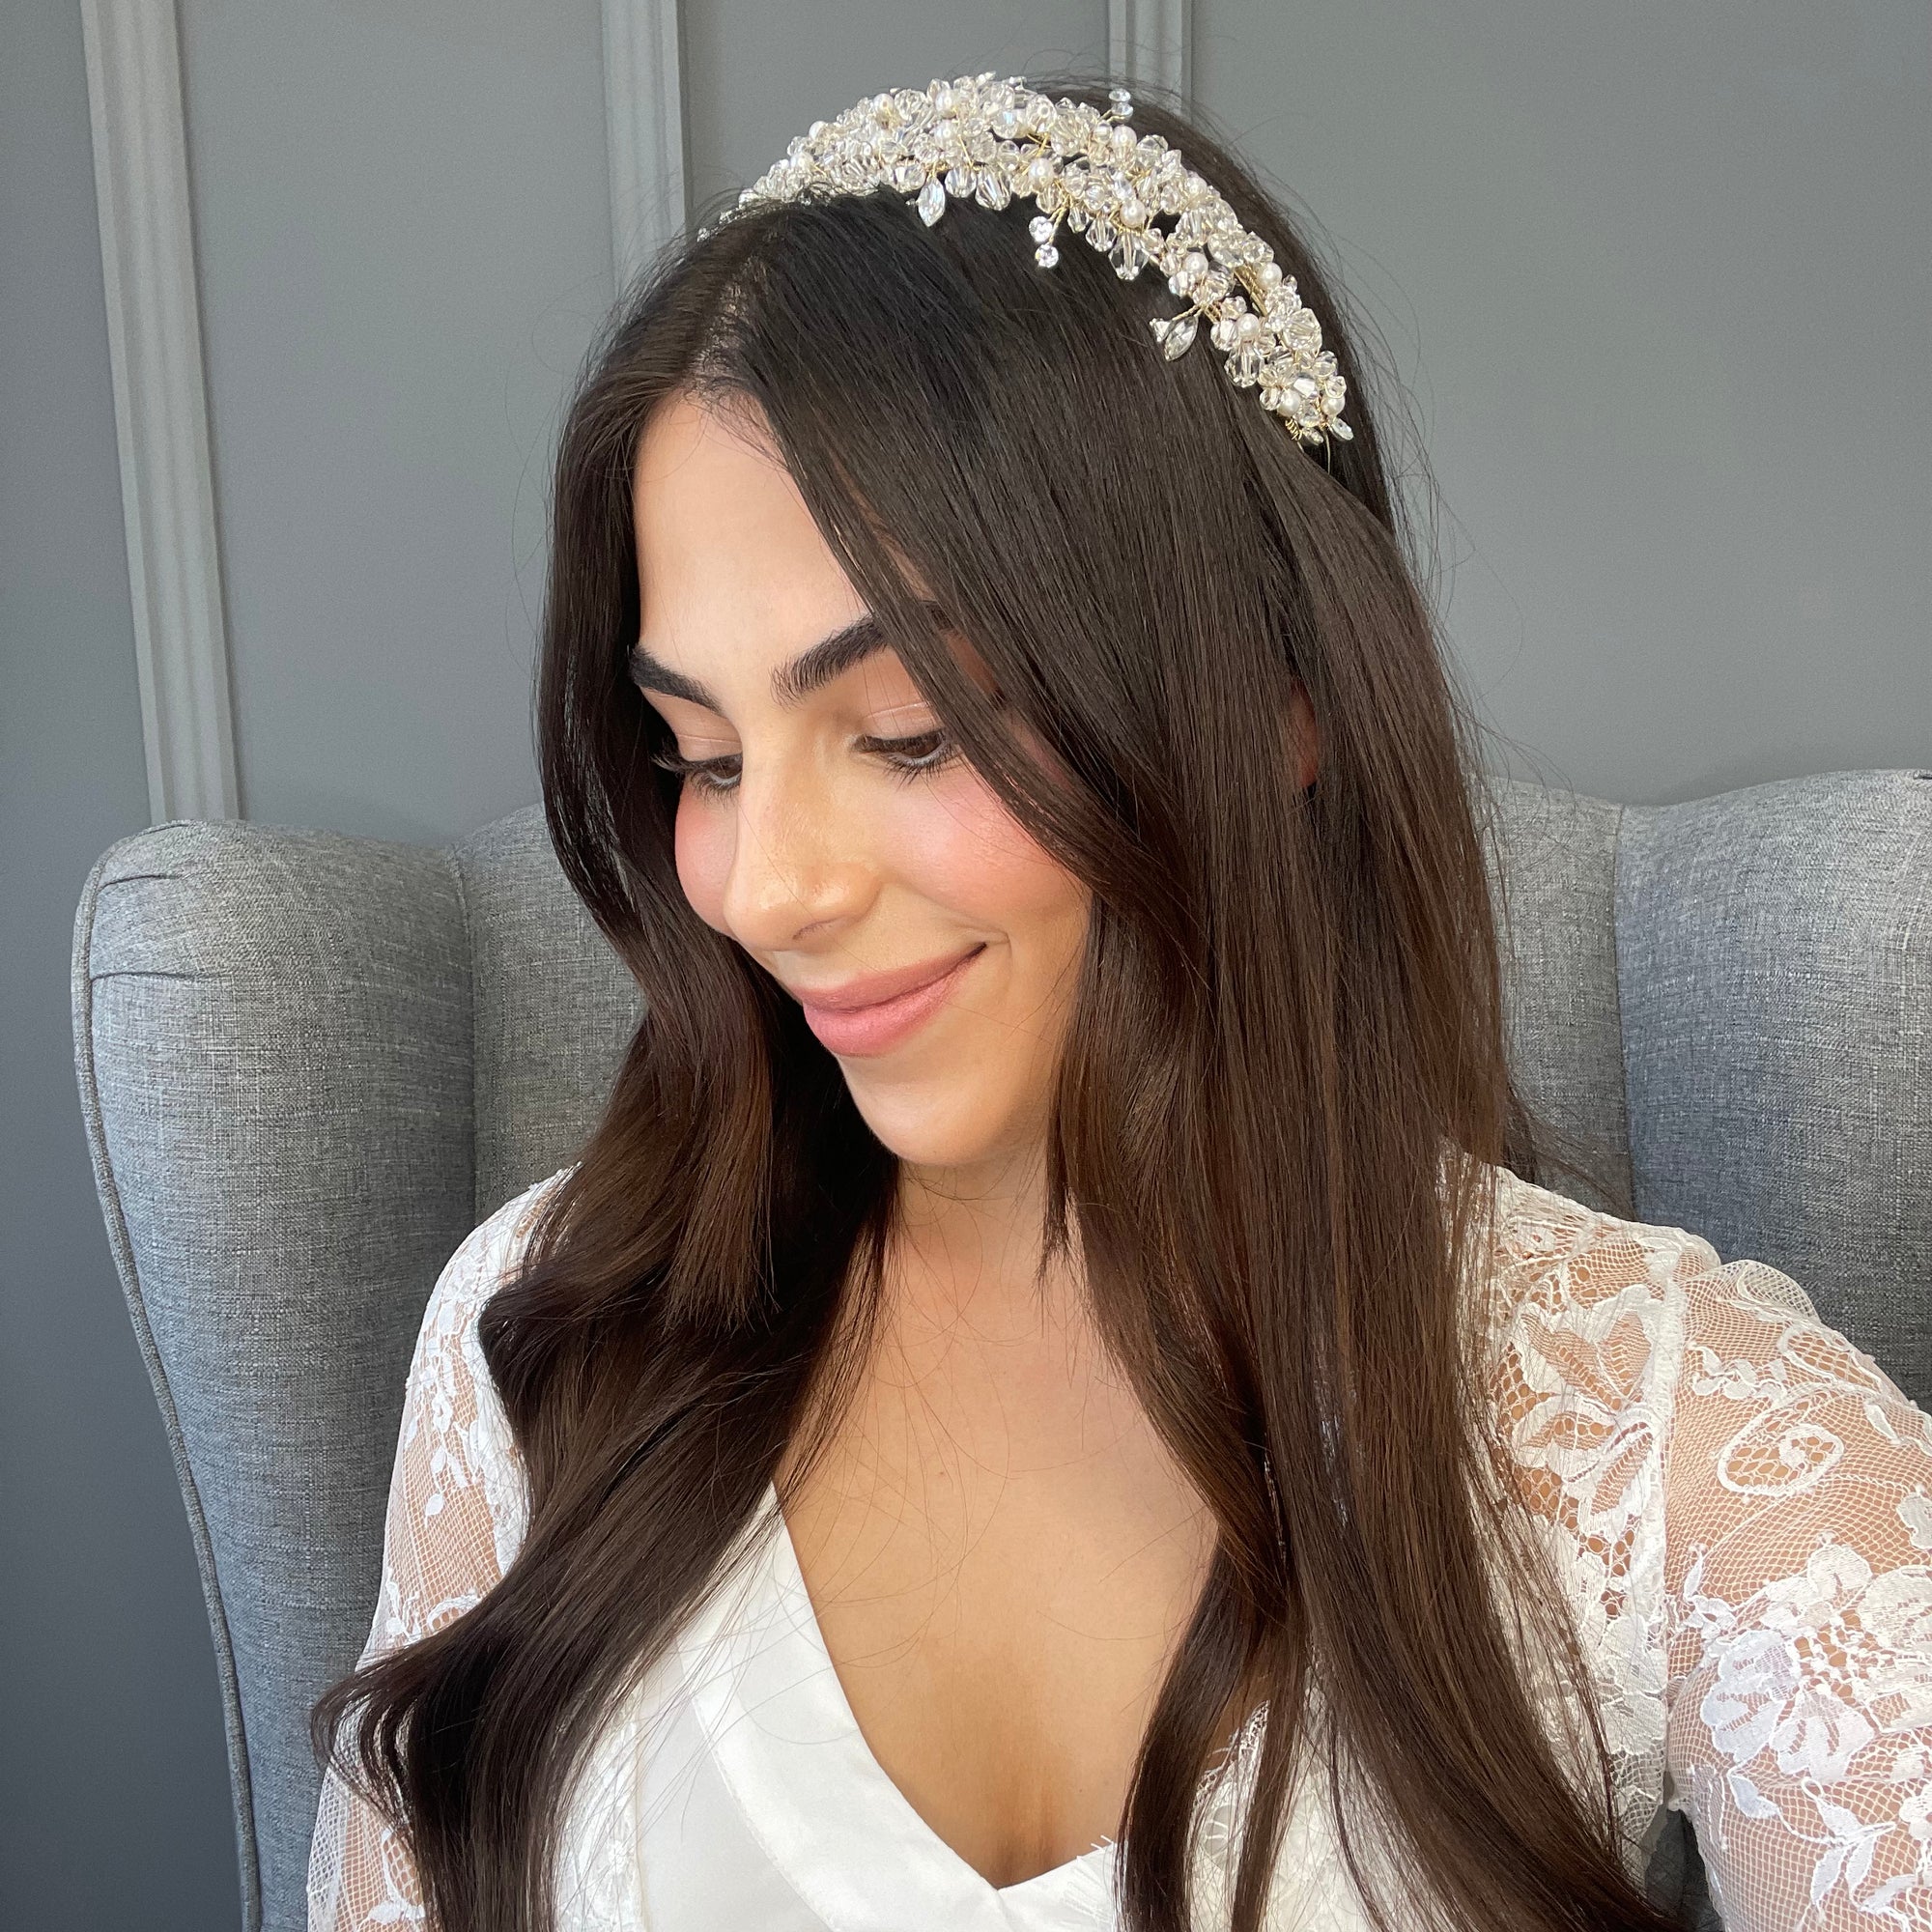 Imogen Luxe Double Bridal Headband with Pearl (Joined Structure) Hair Accessories - Headbands,Tiara  Gold/Pearl  